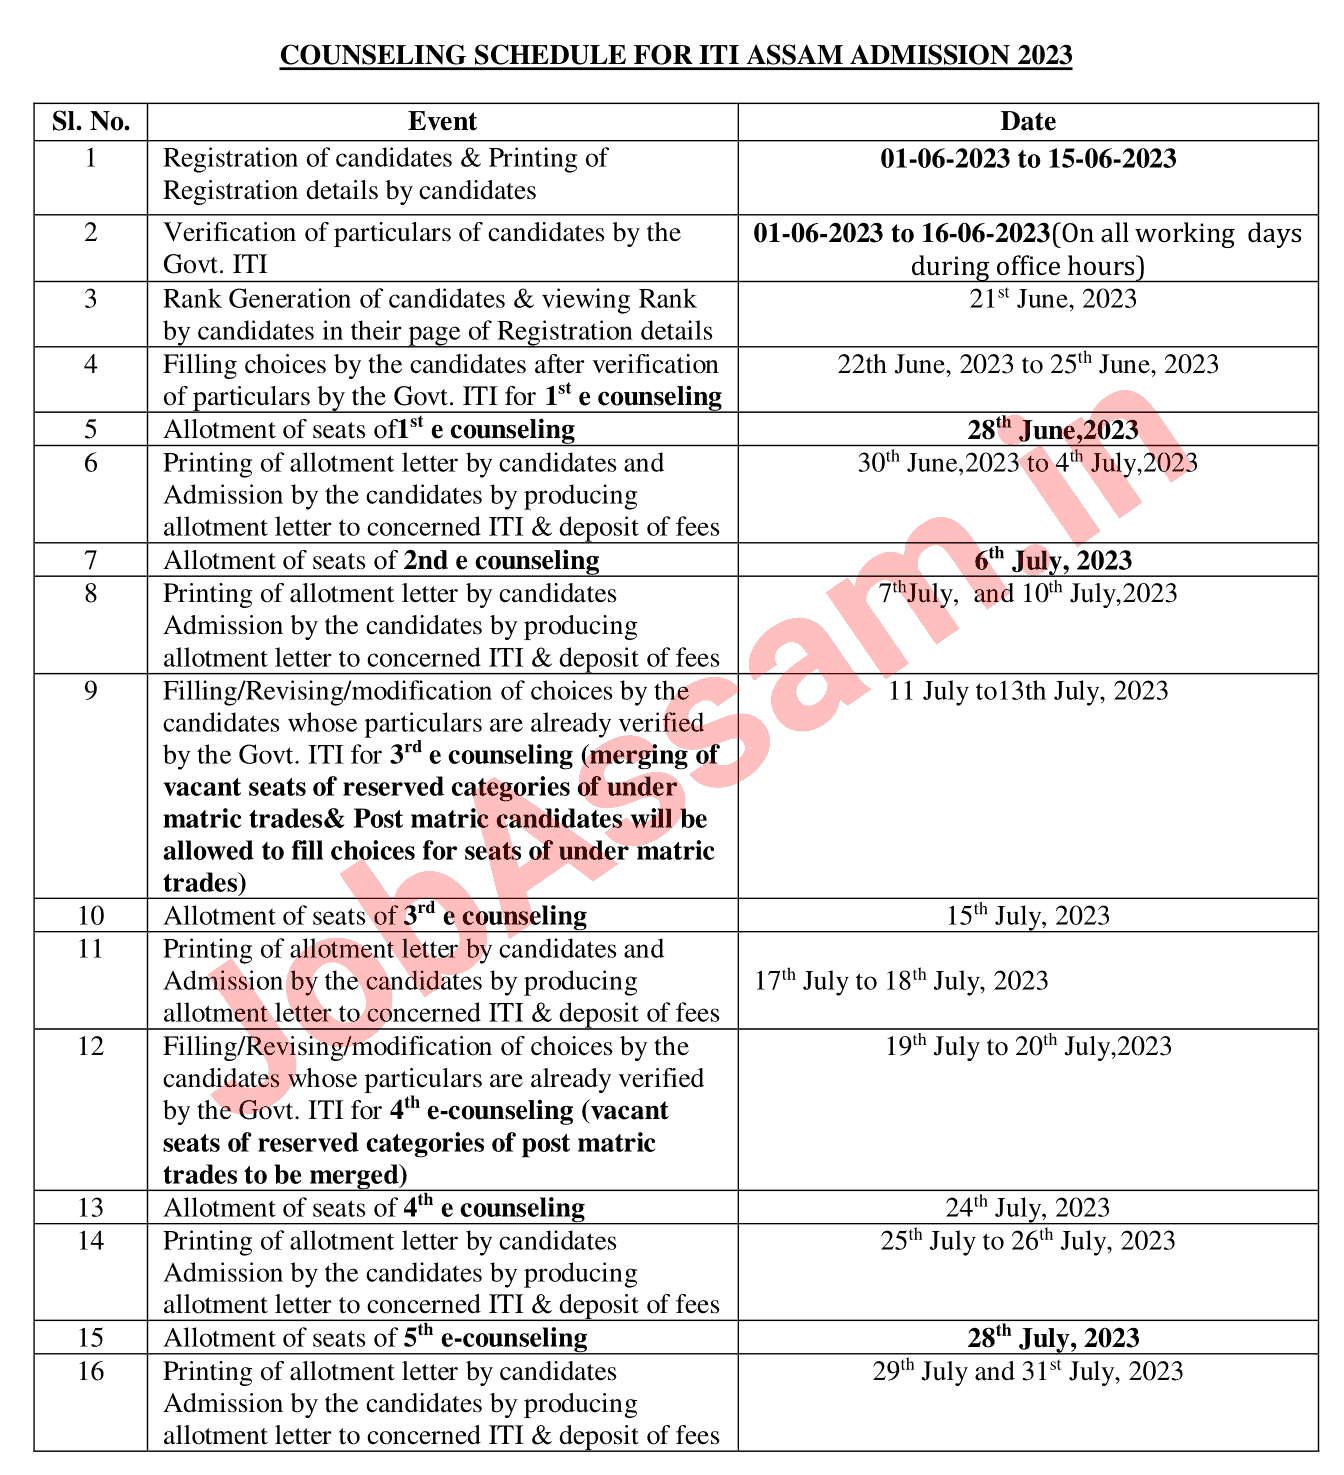 ITI Admission Counseling Schedule